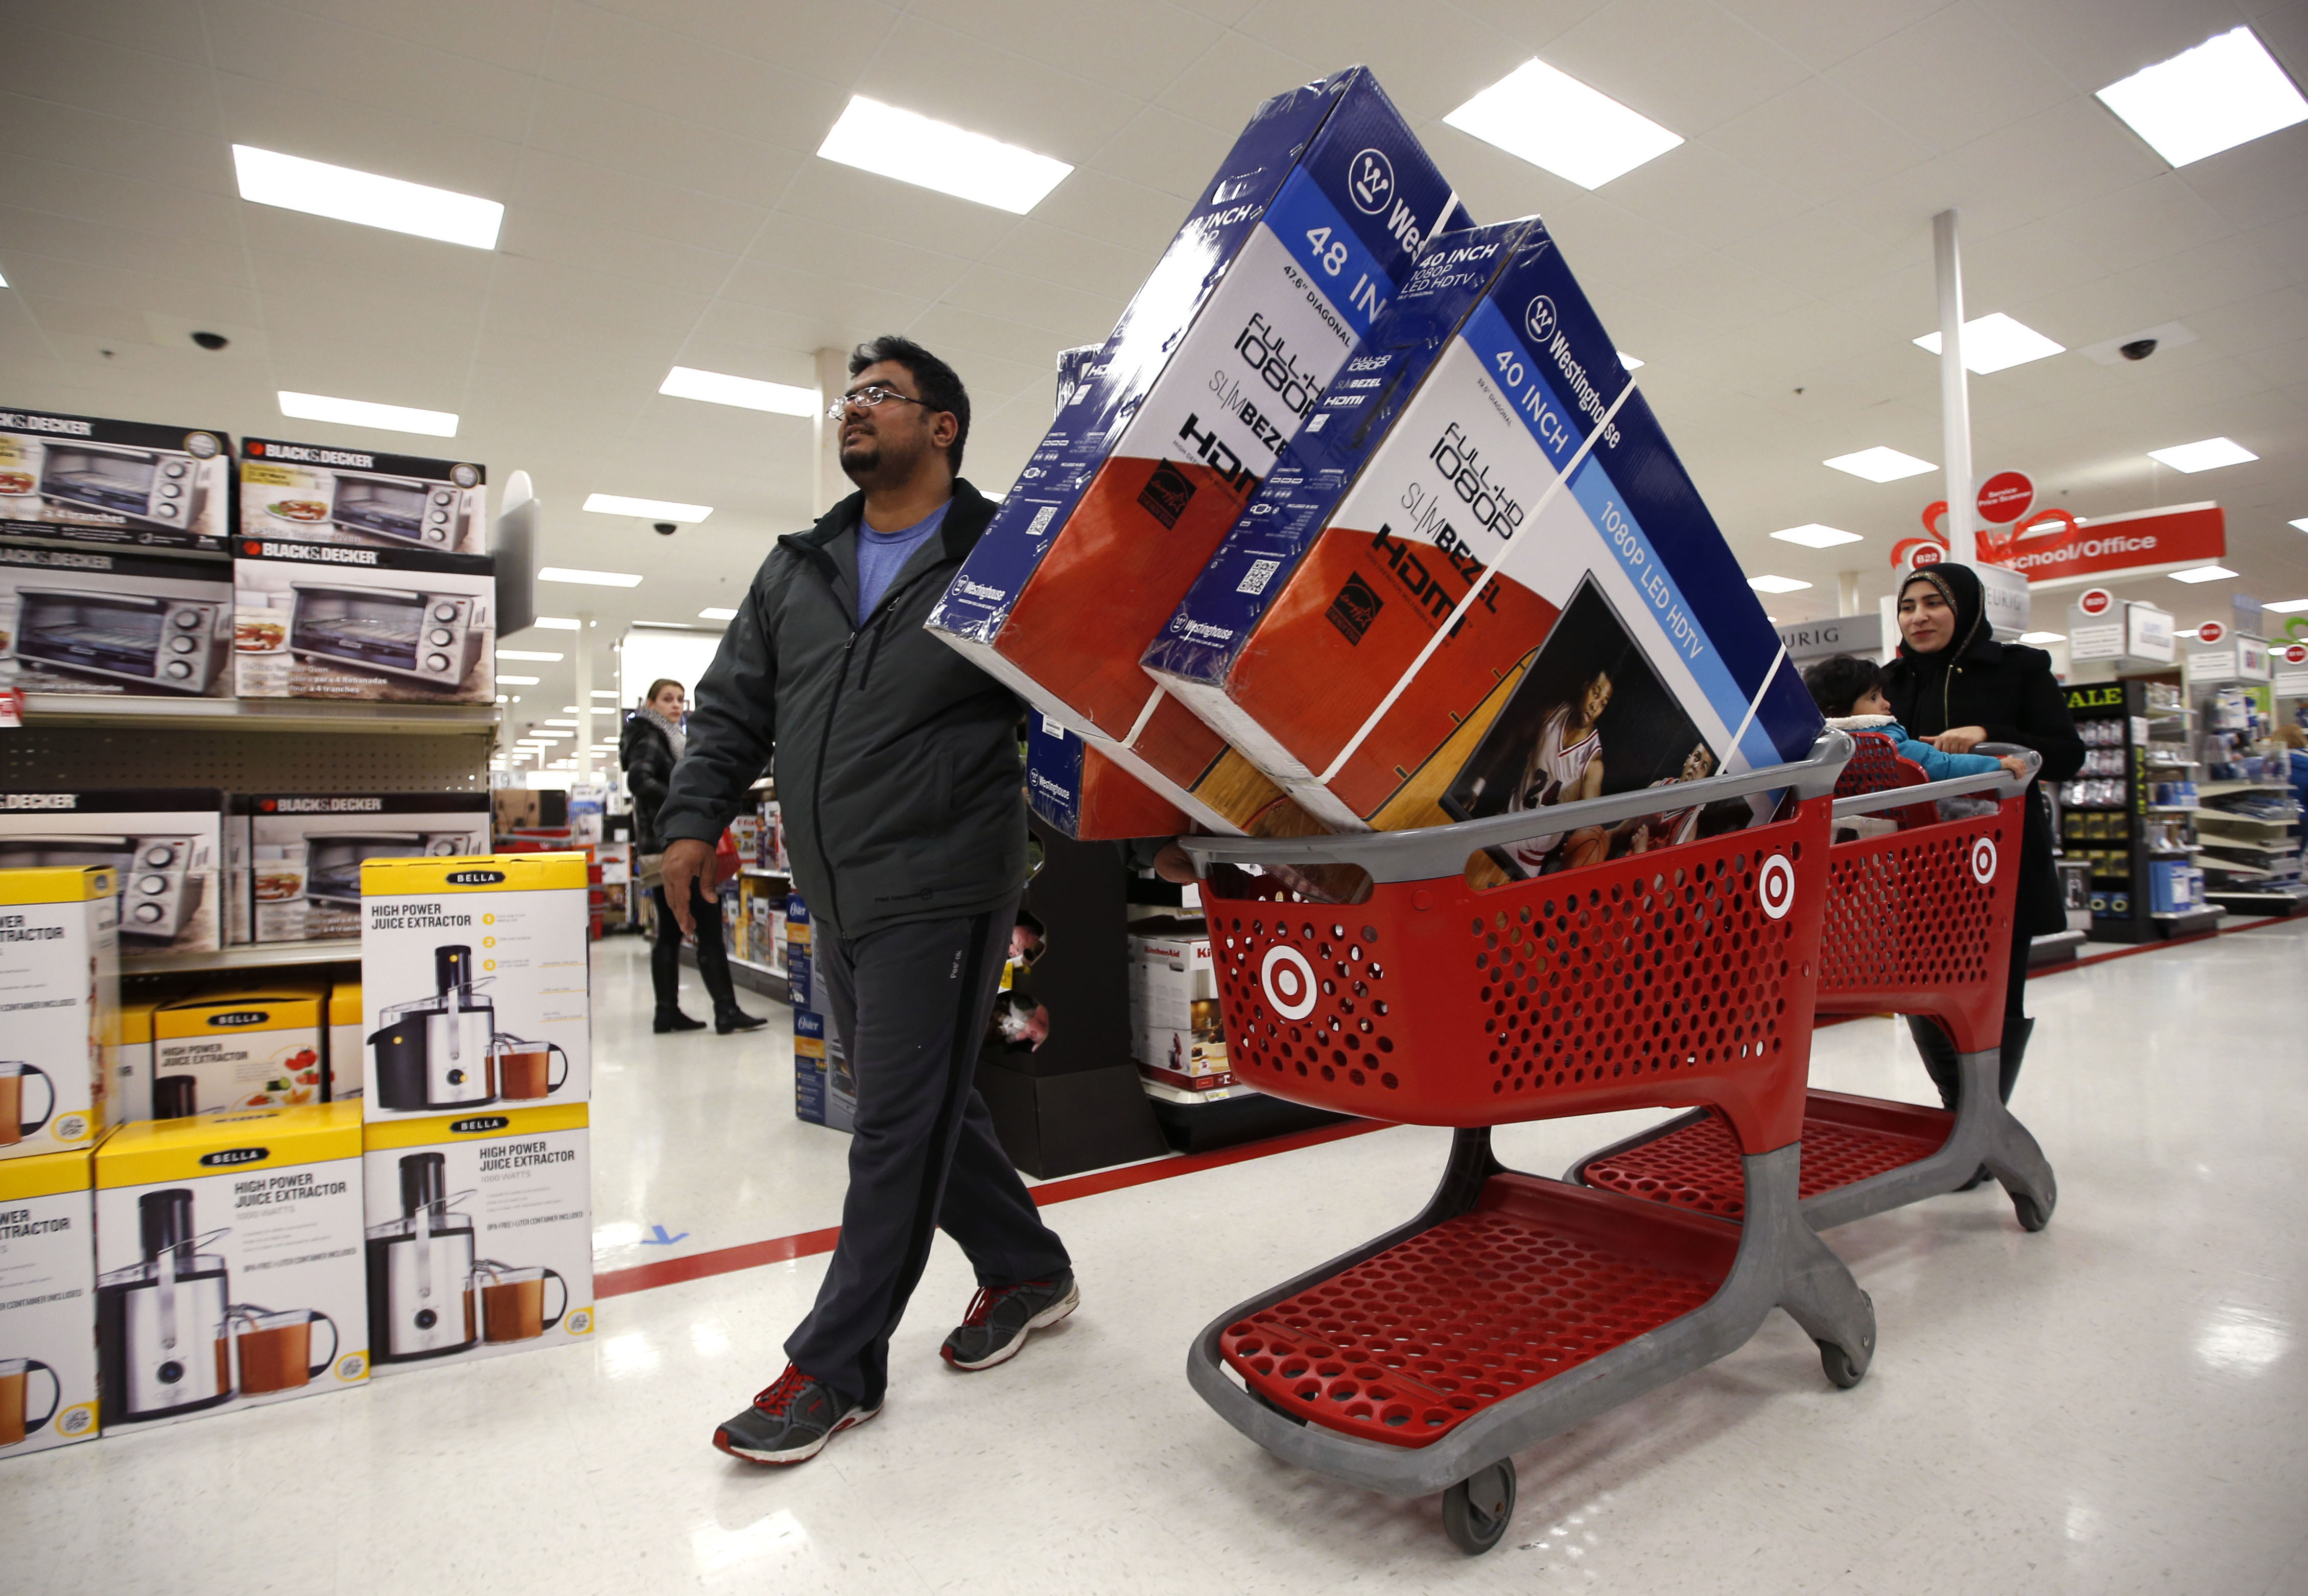 Black Friday Originally Had Dark Meaning – All About America - What Time Costco Opens On Black Friday 2013